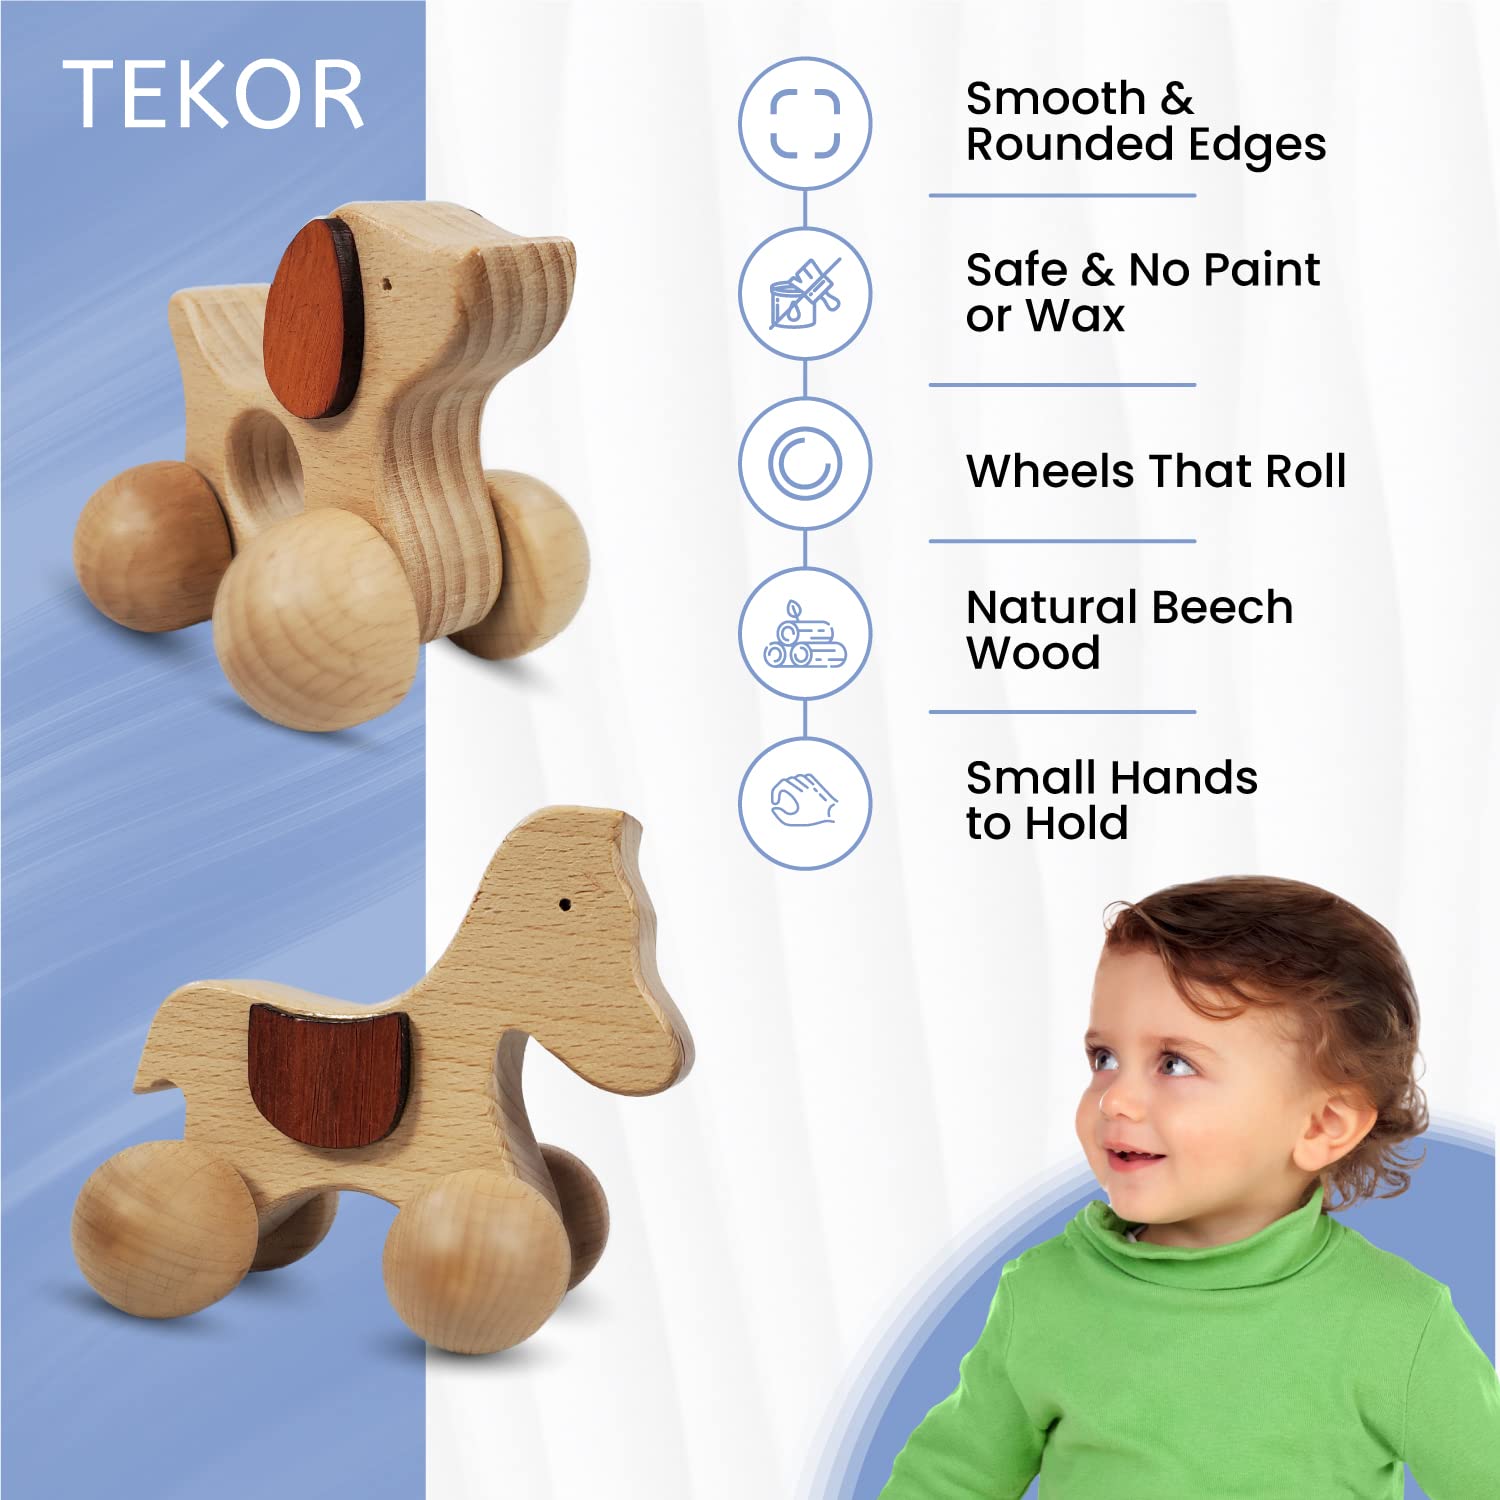 TEKOR Wooden Animal Push Toy with Wheels for Baby, Toddler Grasping & Teething - Montessori Wood Animal Car Set for Skill and Motor Development, Smooth, No Rough Edges (Pack of 2)